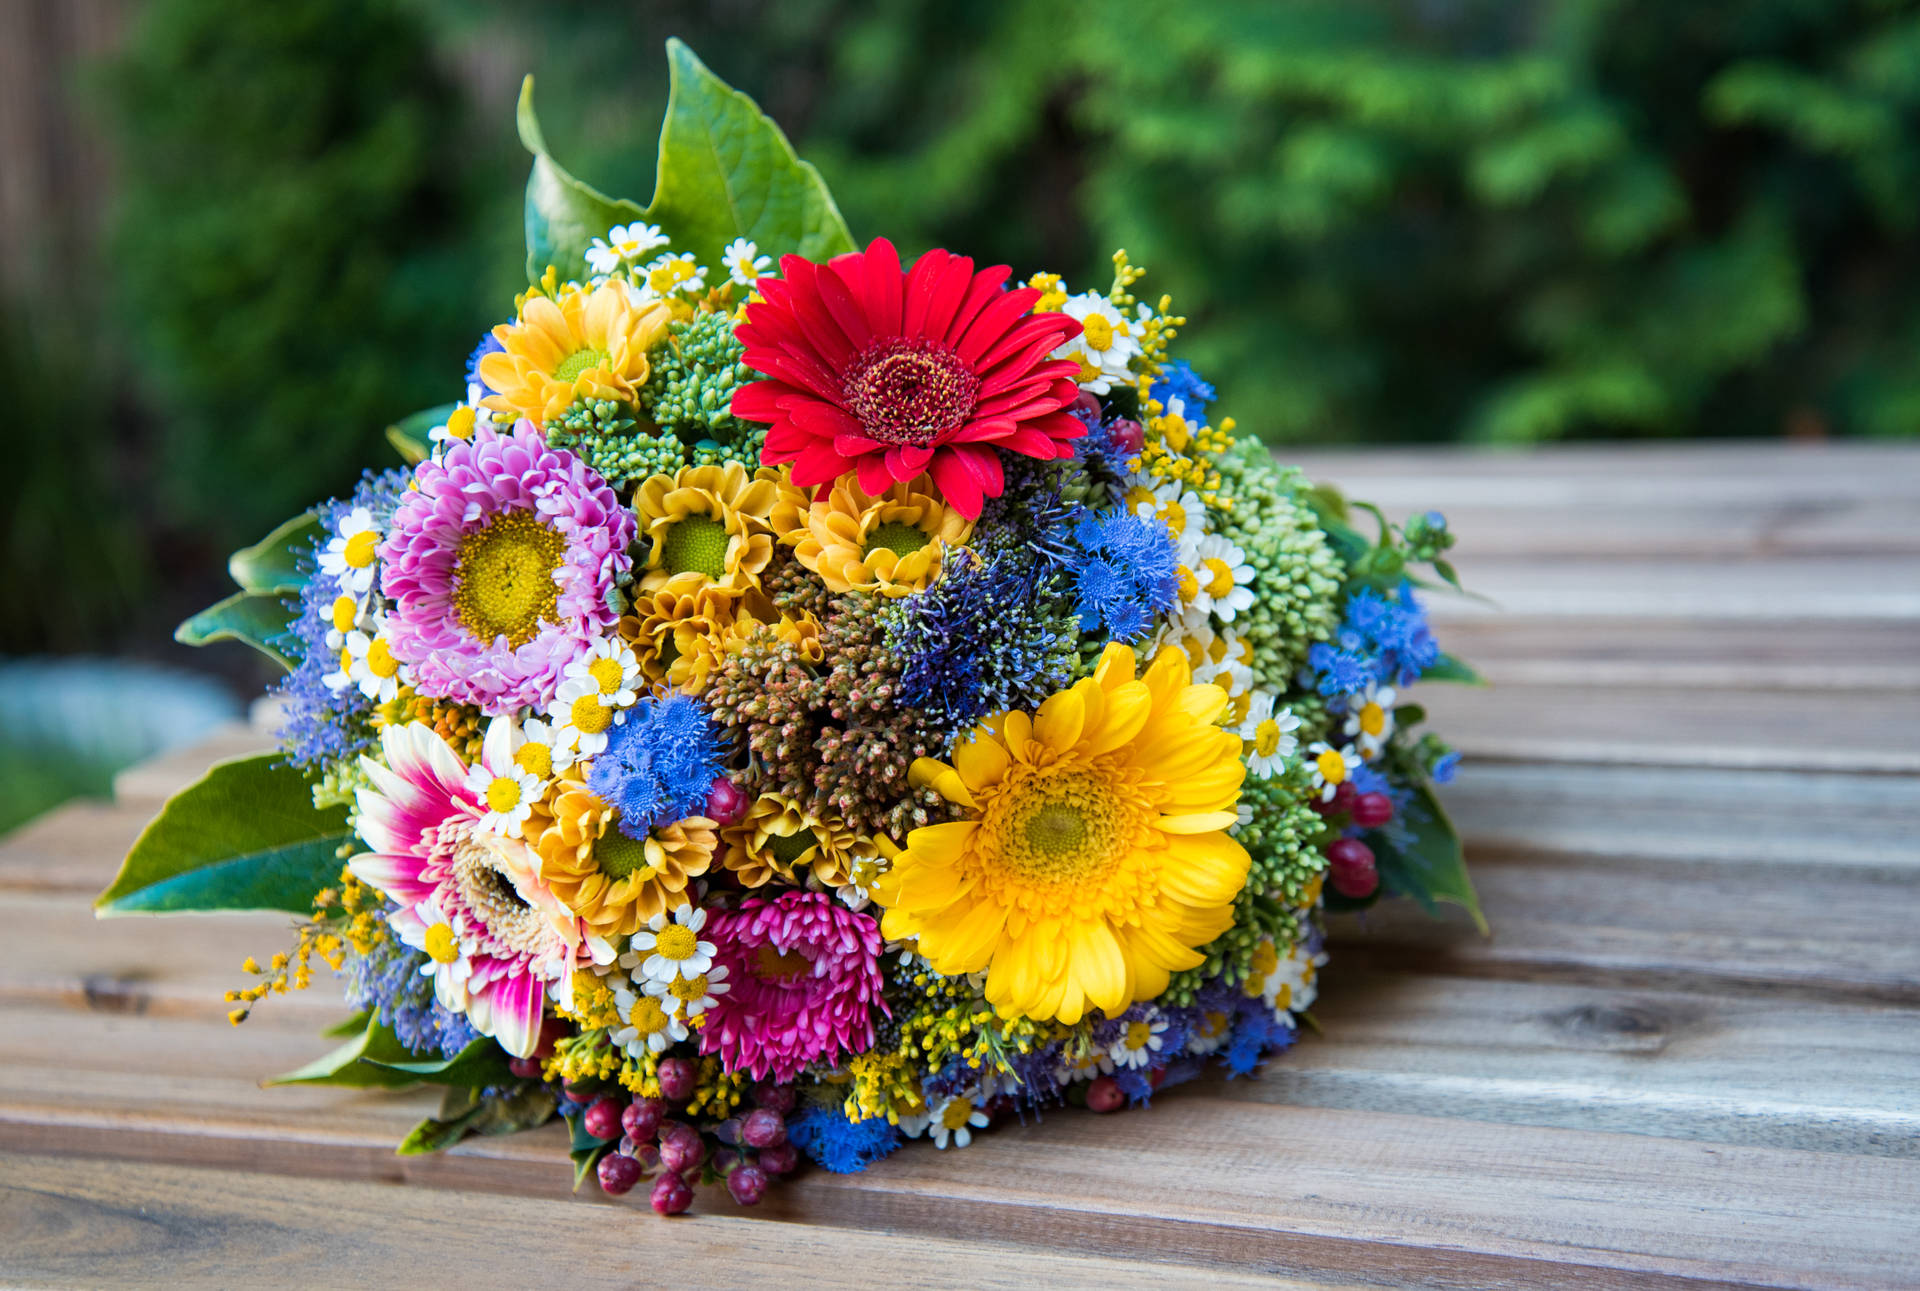 World's Most Beautiful Flowers Colourful Bouquet Wallpaper